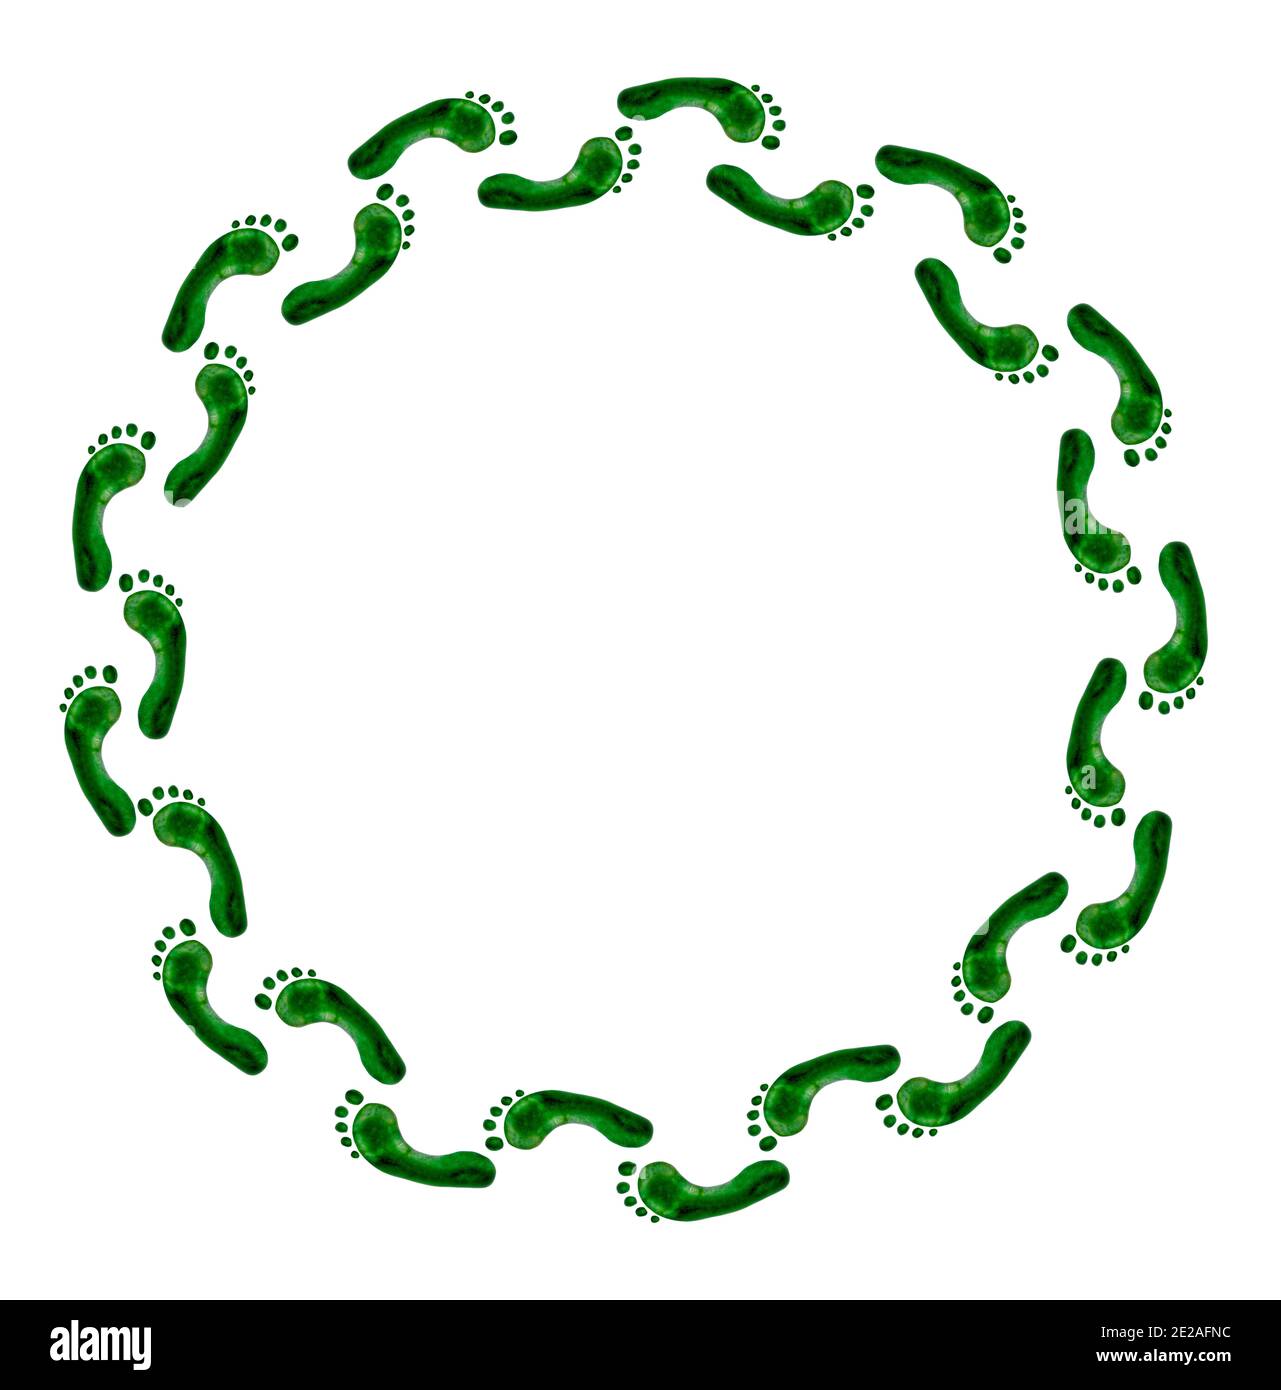 Overhead view of human footprint coloured green in shape of a circle Stock Photo